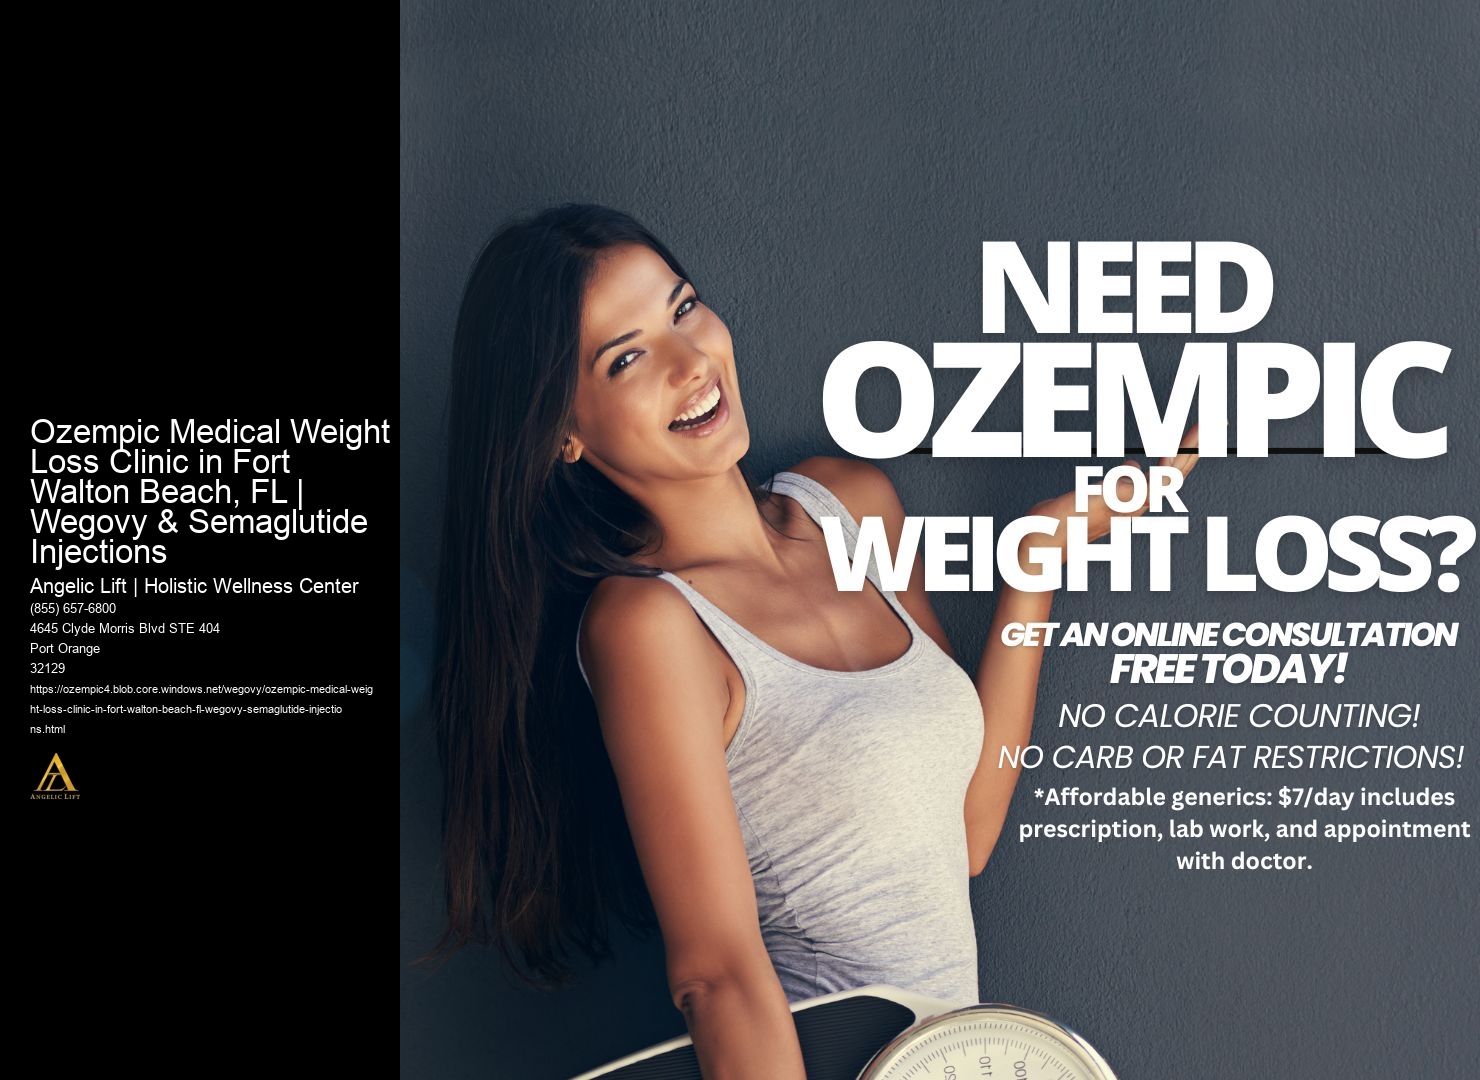 Ozempic Medical Weight Loss Clinic in Fort Walton Beach, FL | Wegovy & Semaglutide Injections